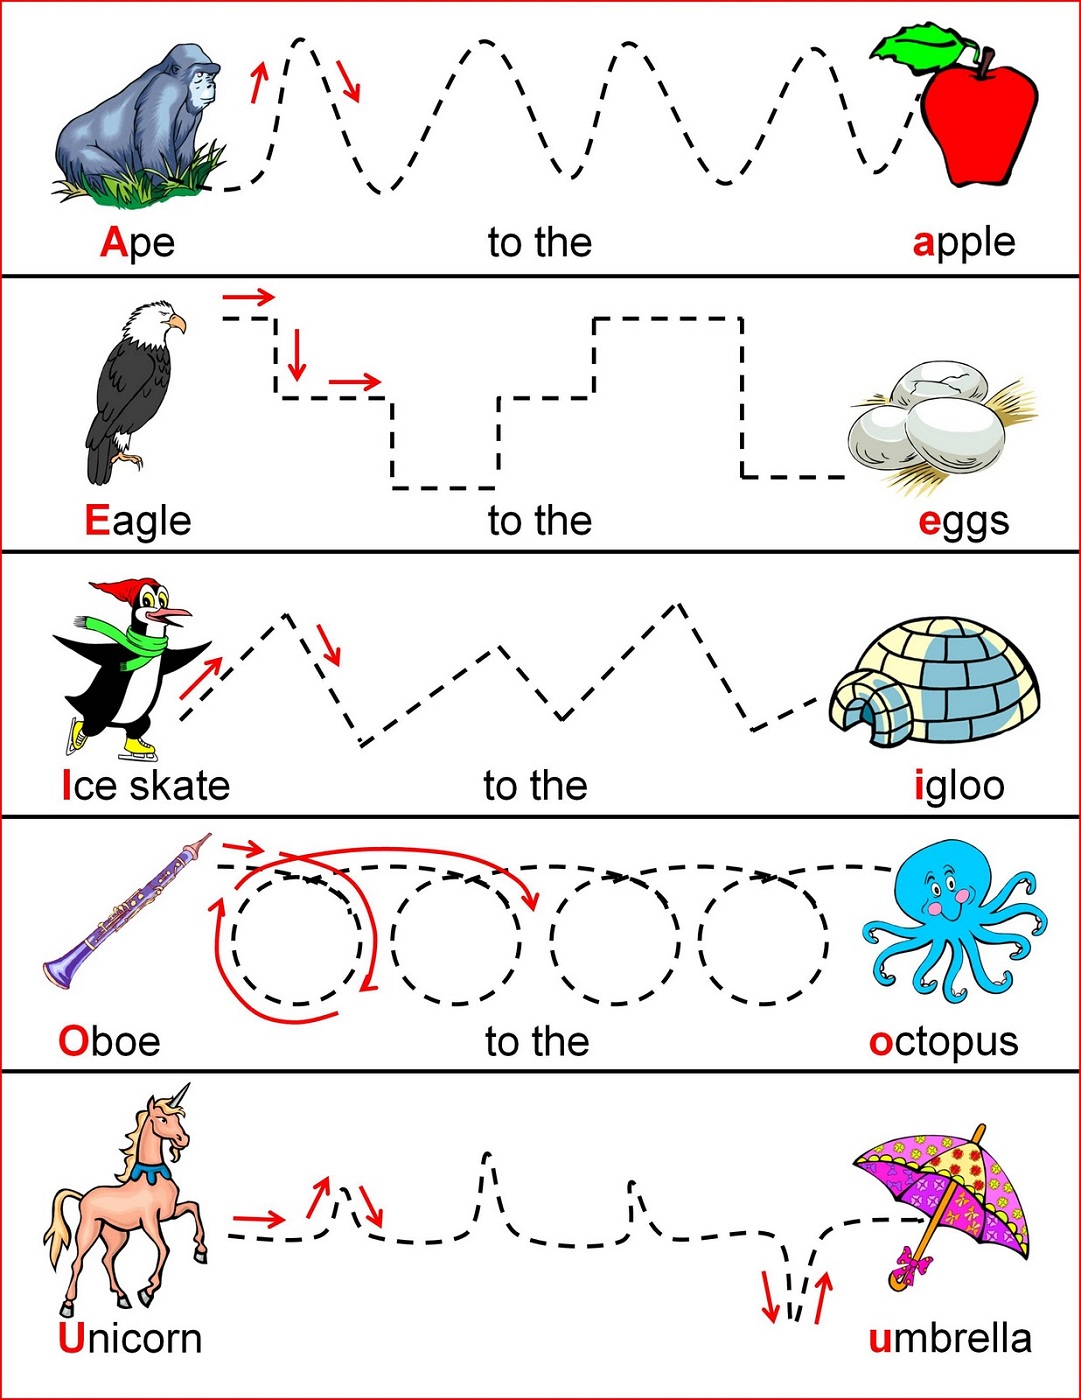 image-result-for-fun-number-game-worksheets-for-kids-4-years-old-free